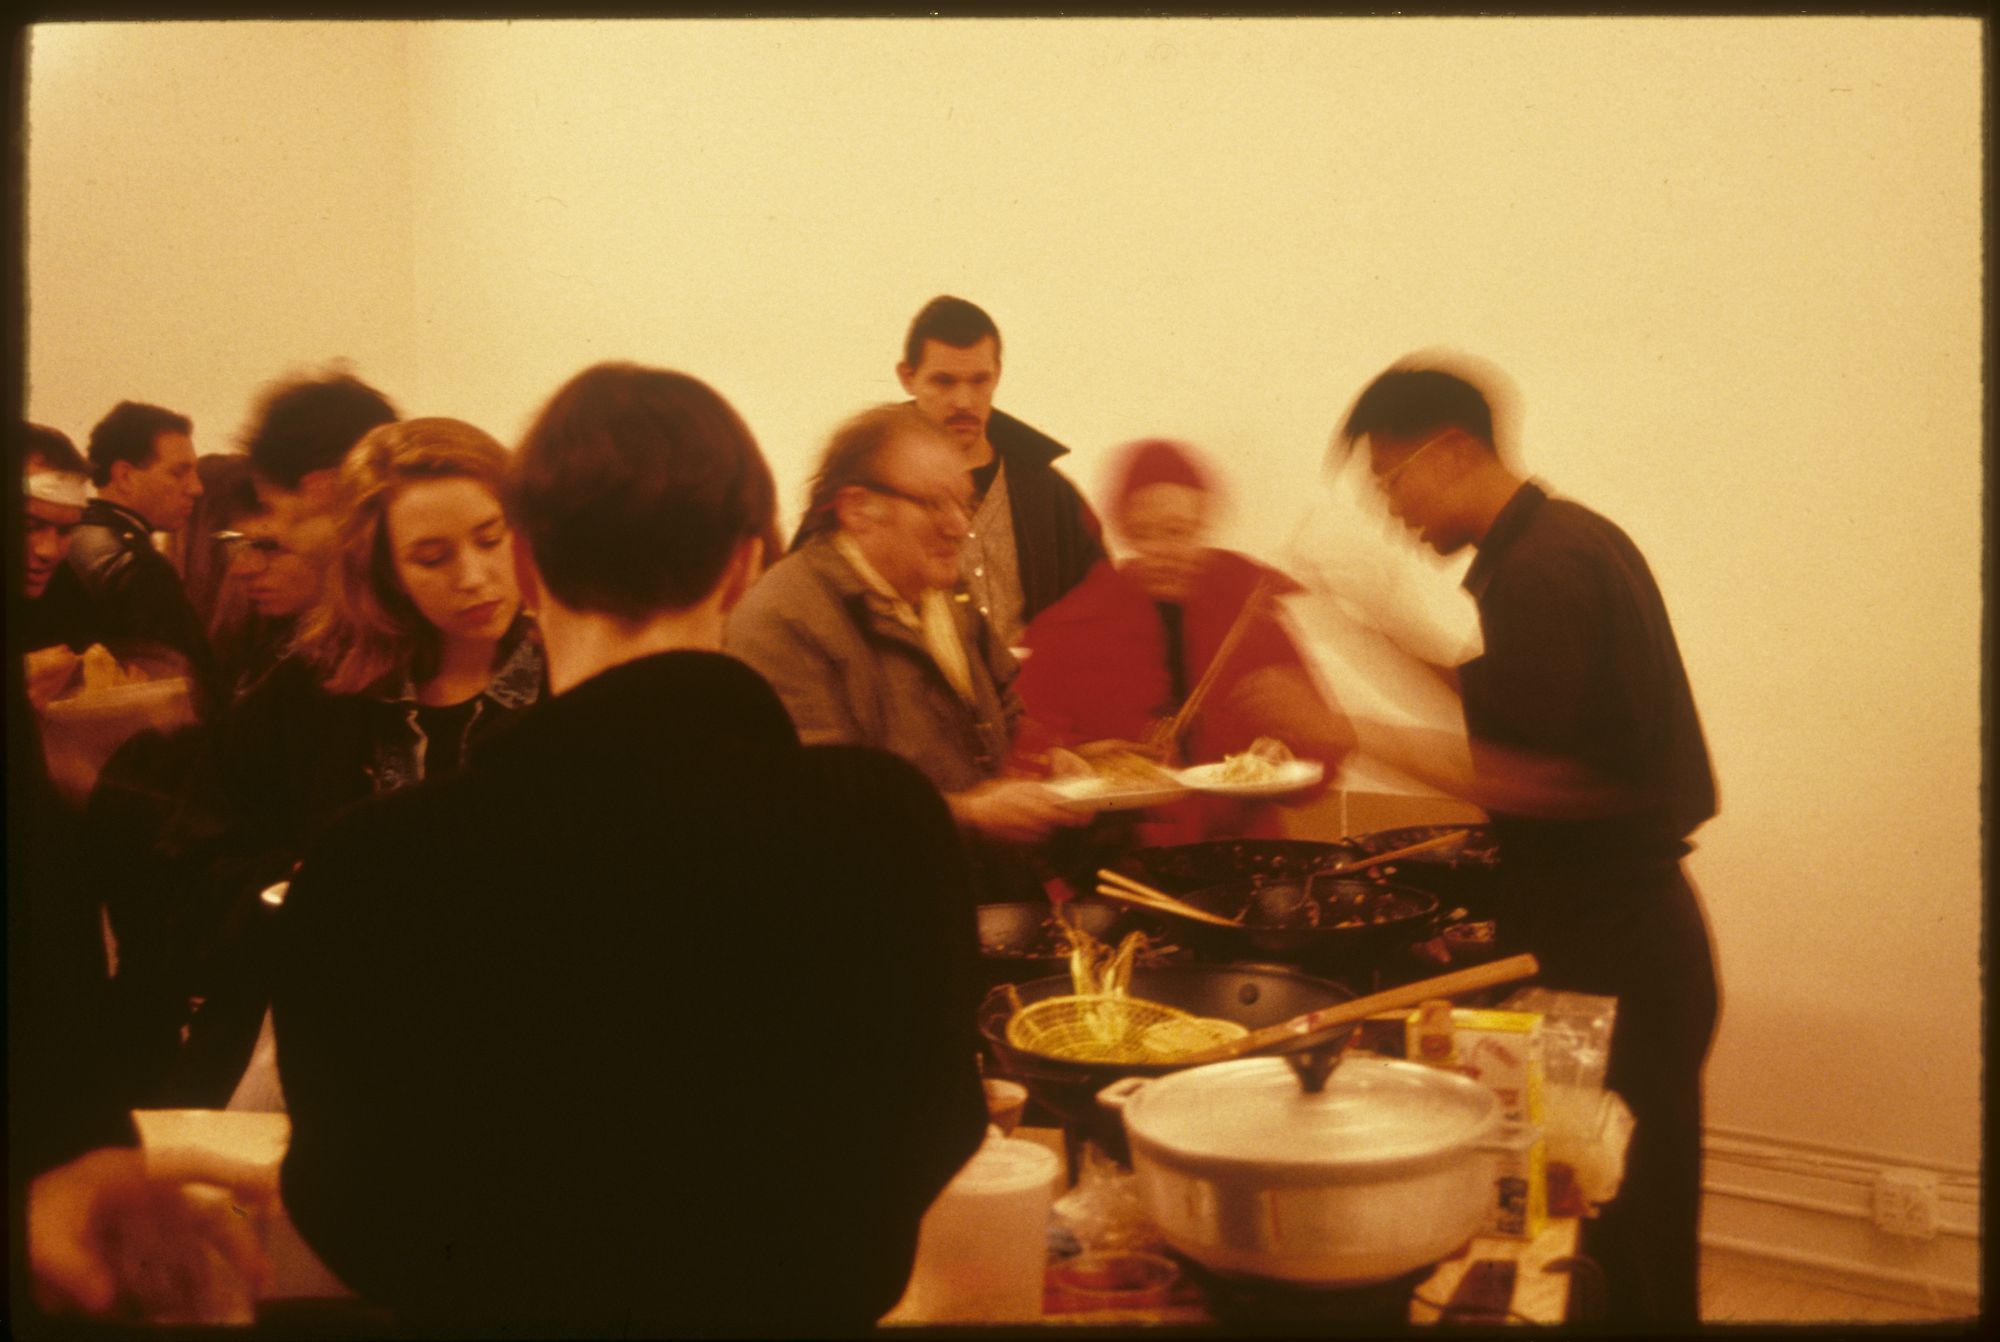 An image of a group of people standing next to an artist who's cooking phad thai.